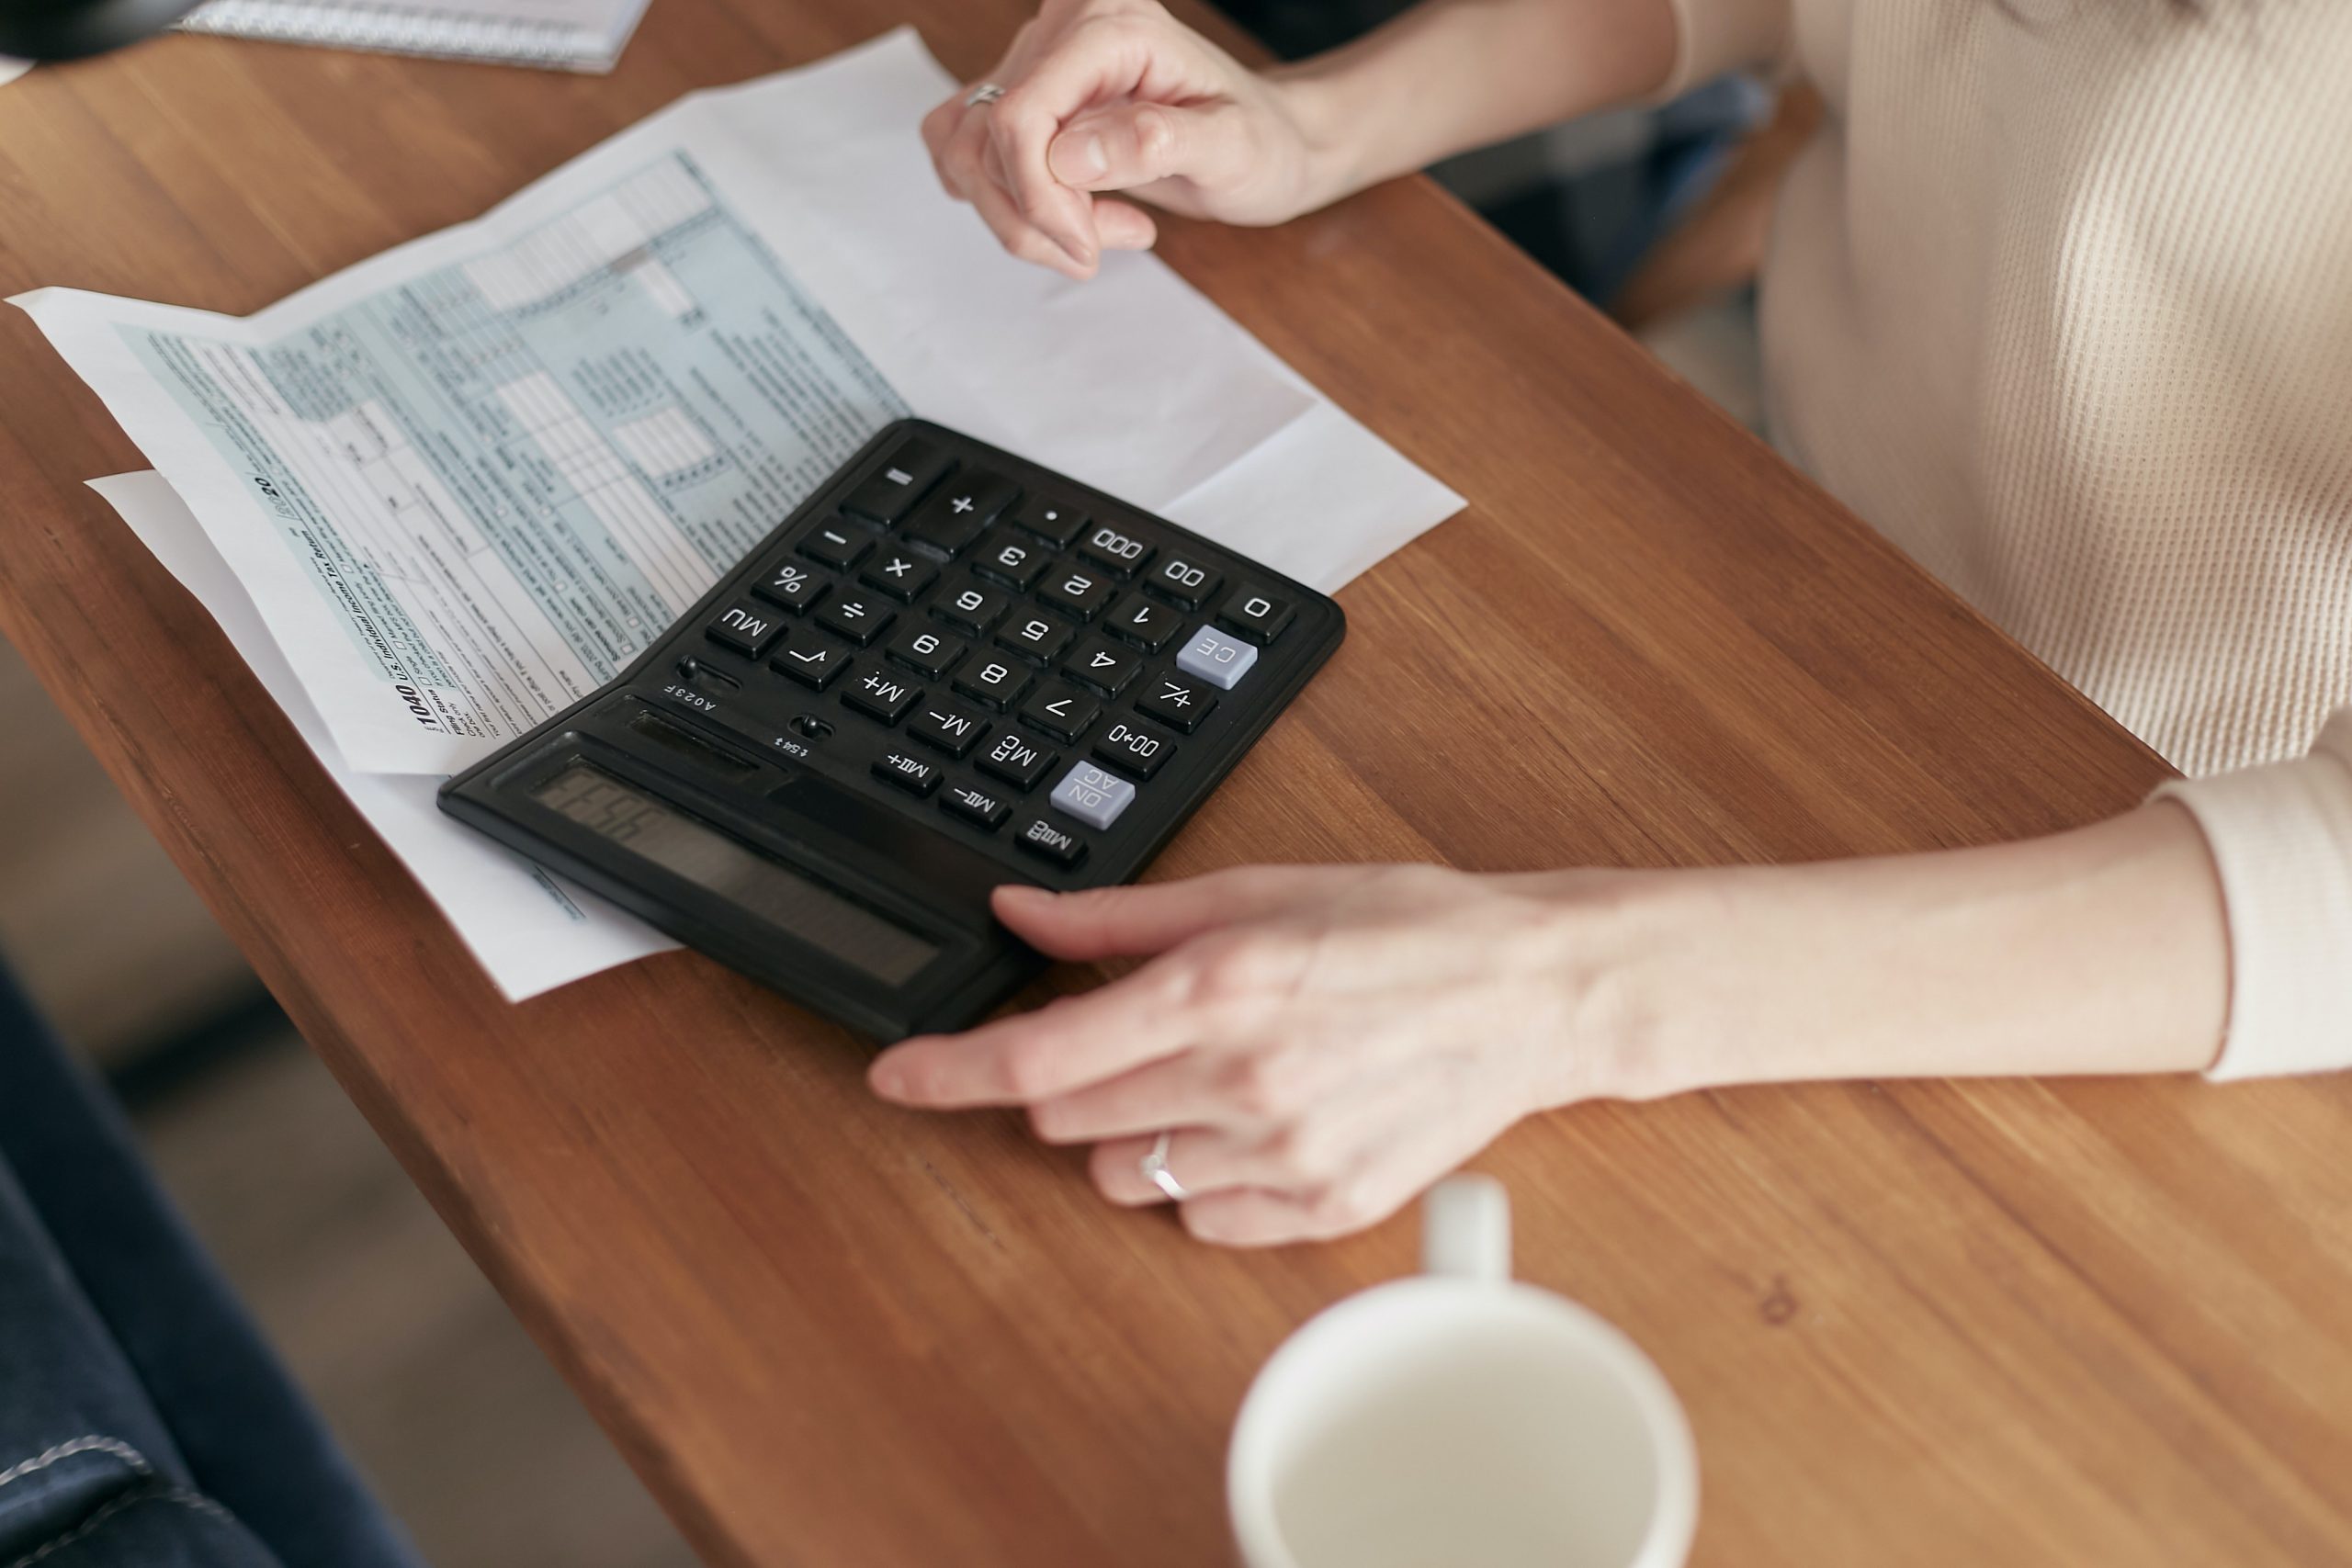 a woman calculates the cost of TMS therapy using a calculator and paper bills.